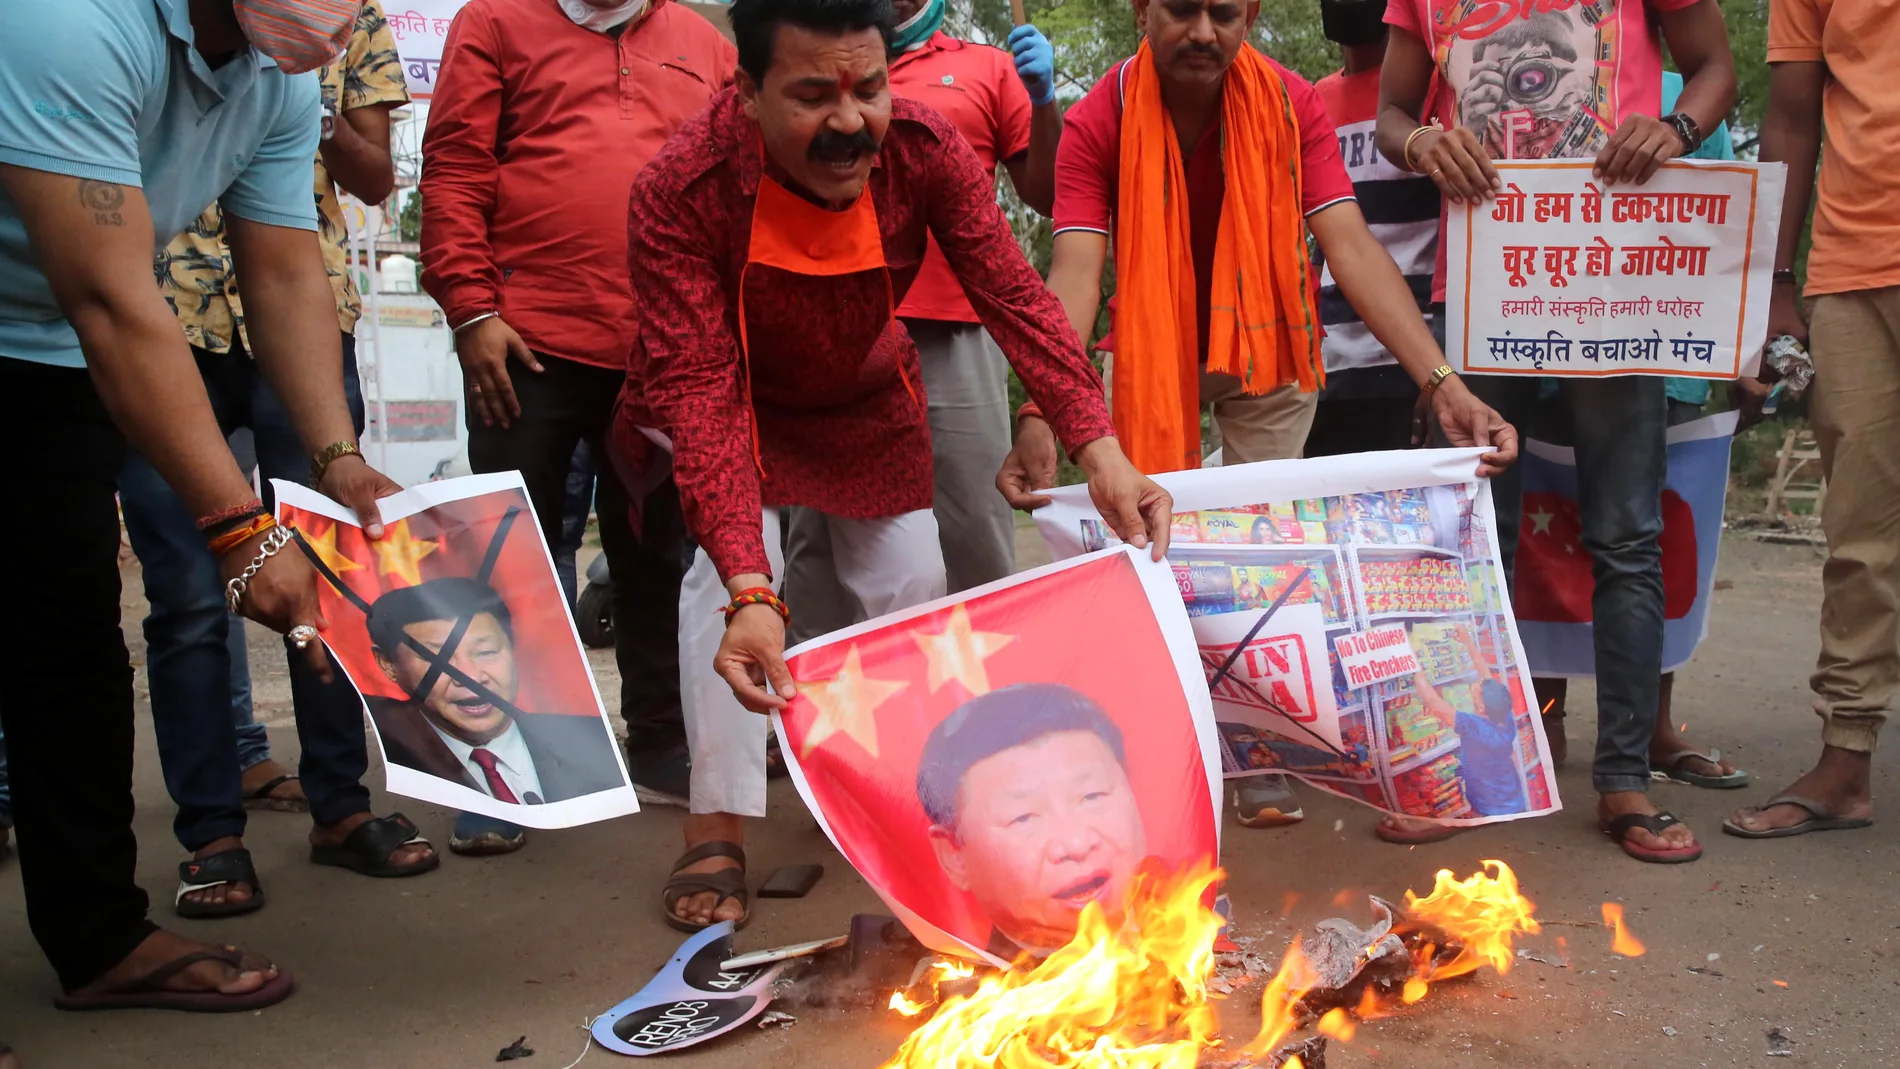 Protest against China in Bhopal